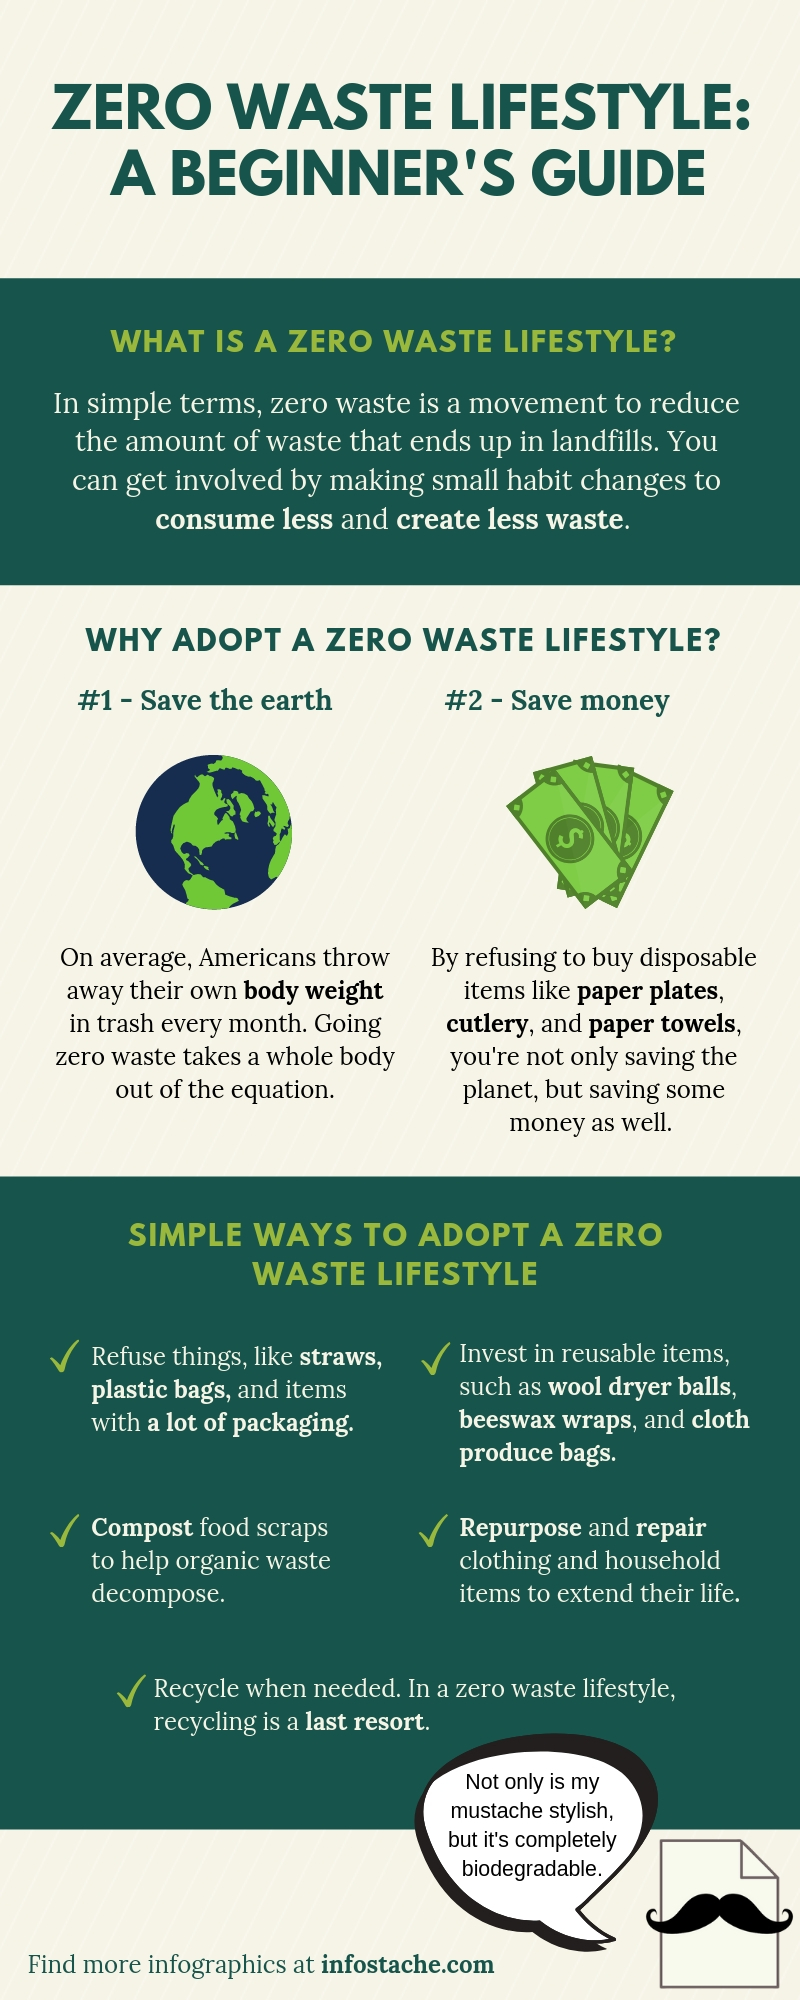 Zero Waste Lifestyle: A Beginner's Guide - Infographic